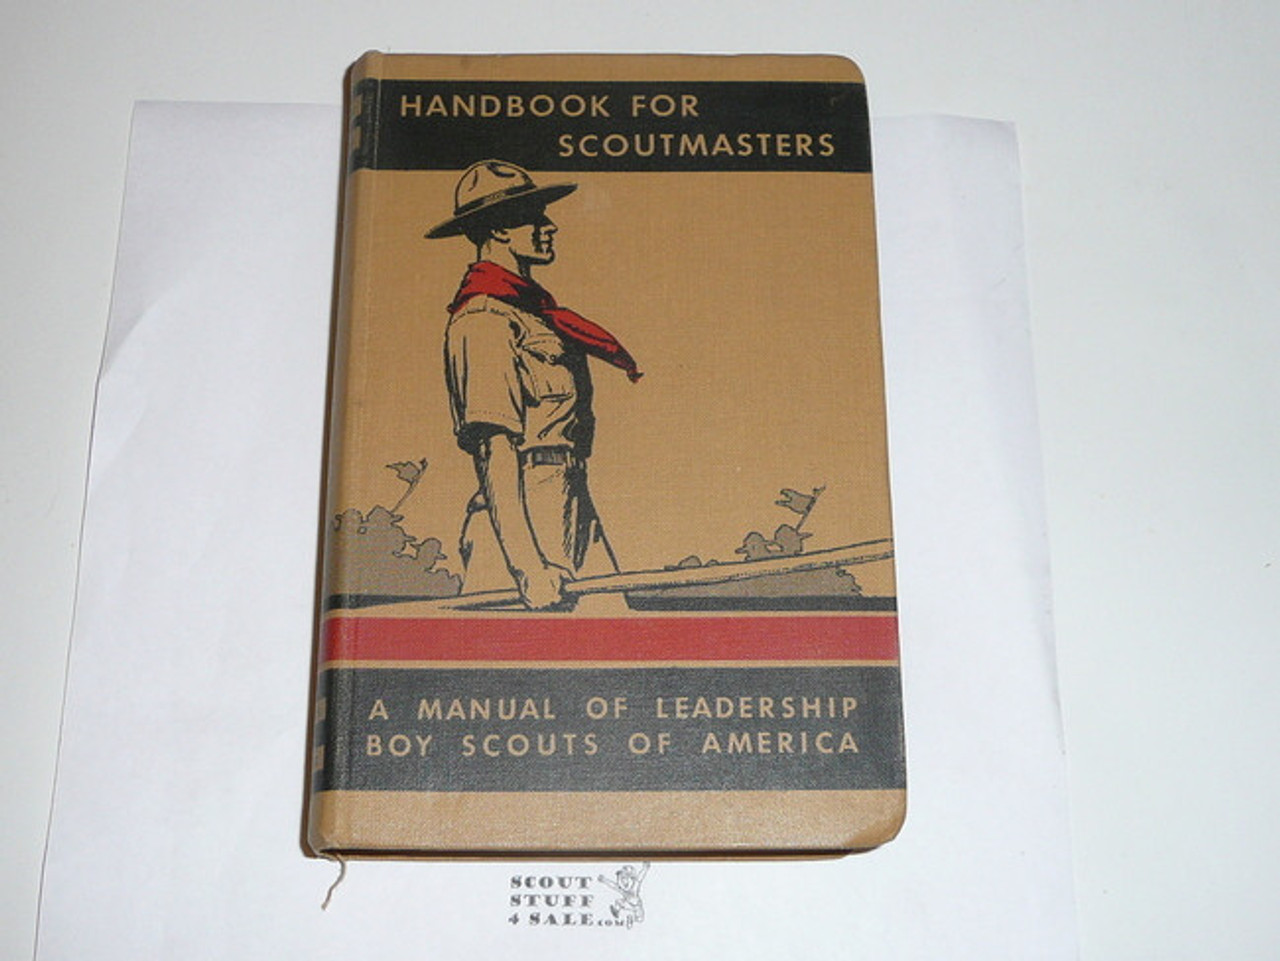 1937 Handbook For Scoutmasters, Third Edition, Volume 2, First printing (Spr-37), near MINT Condition